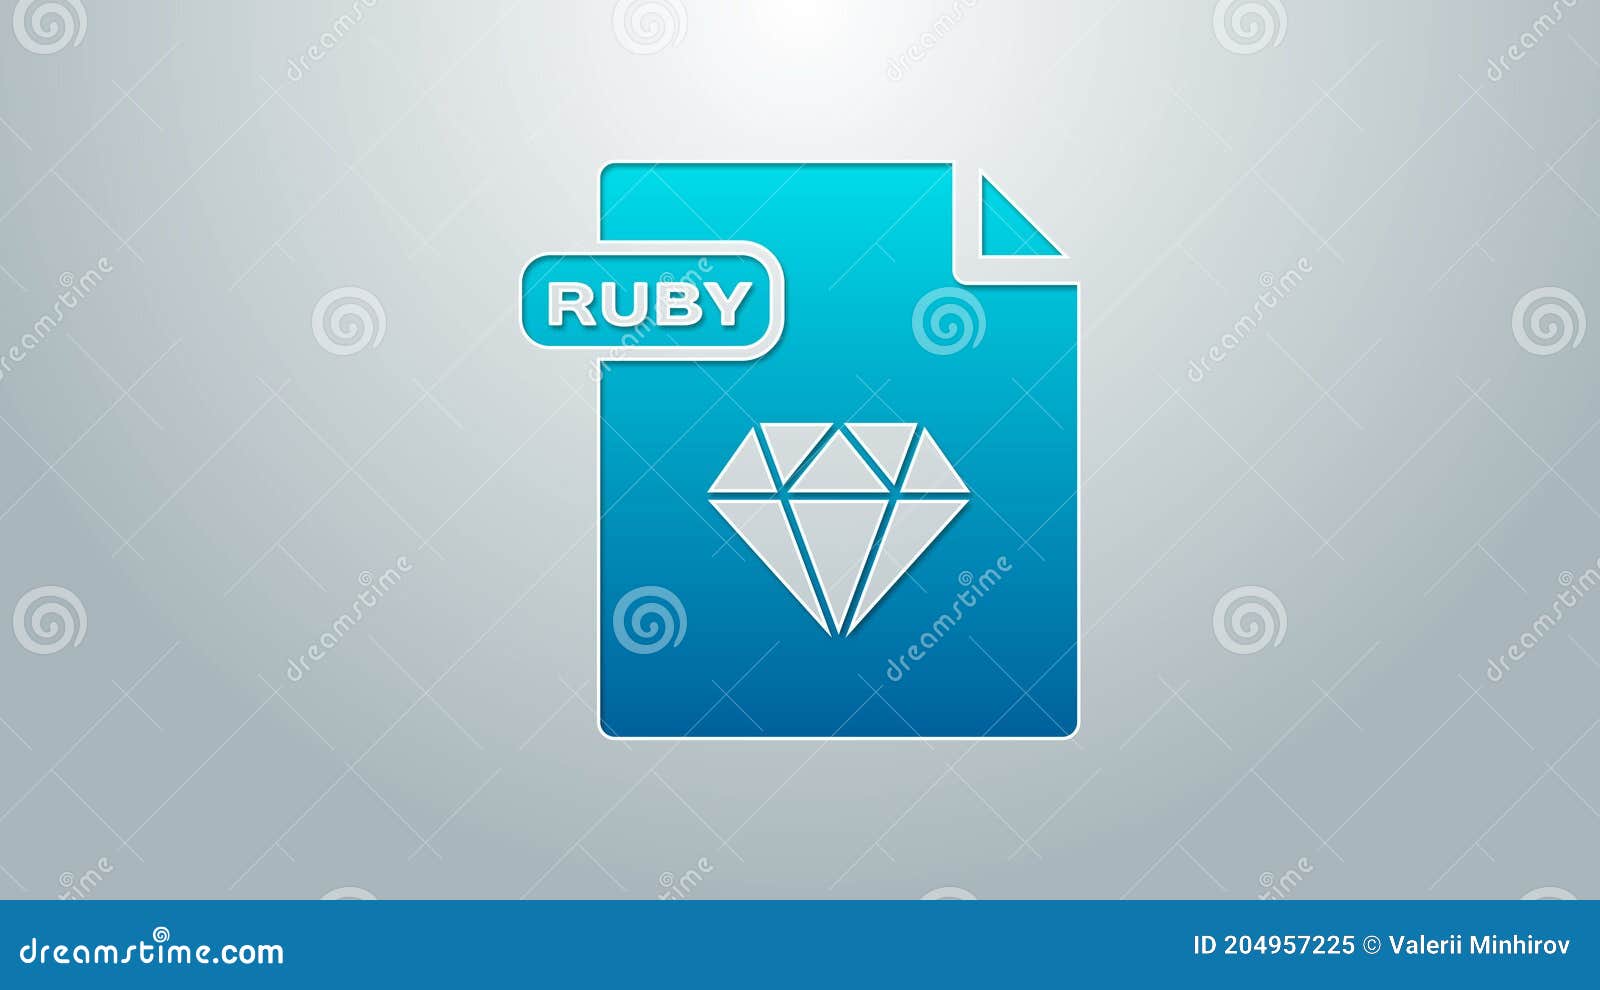 ruby download file